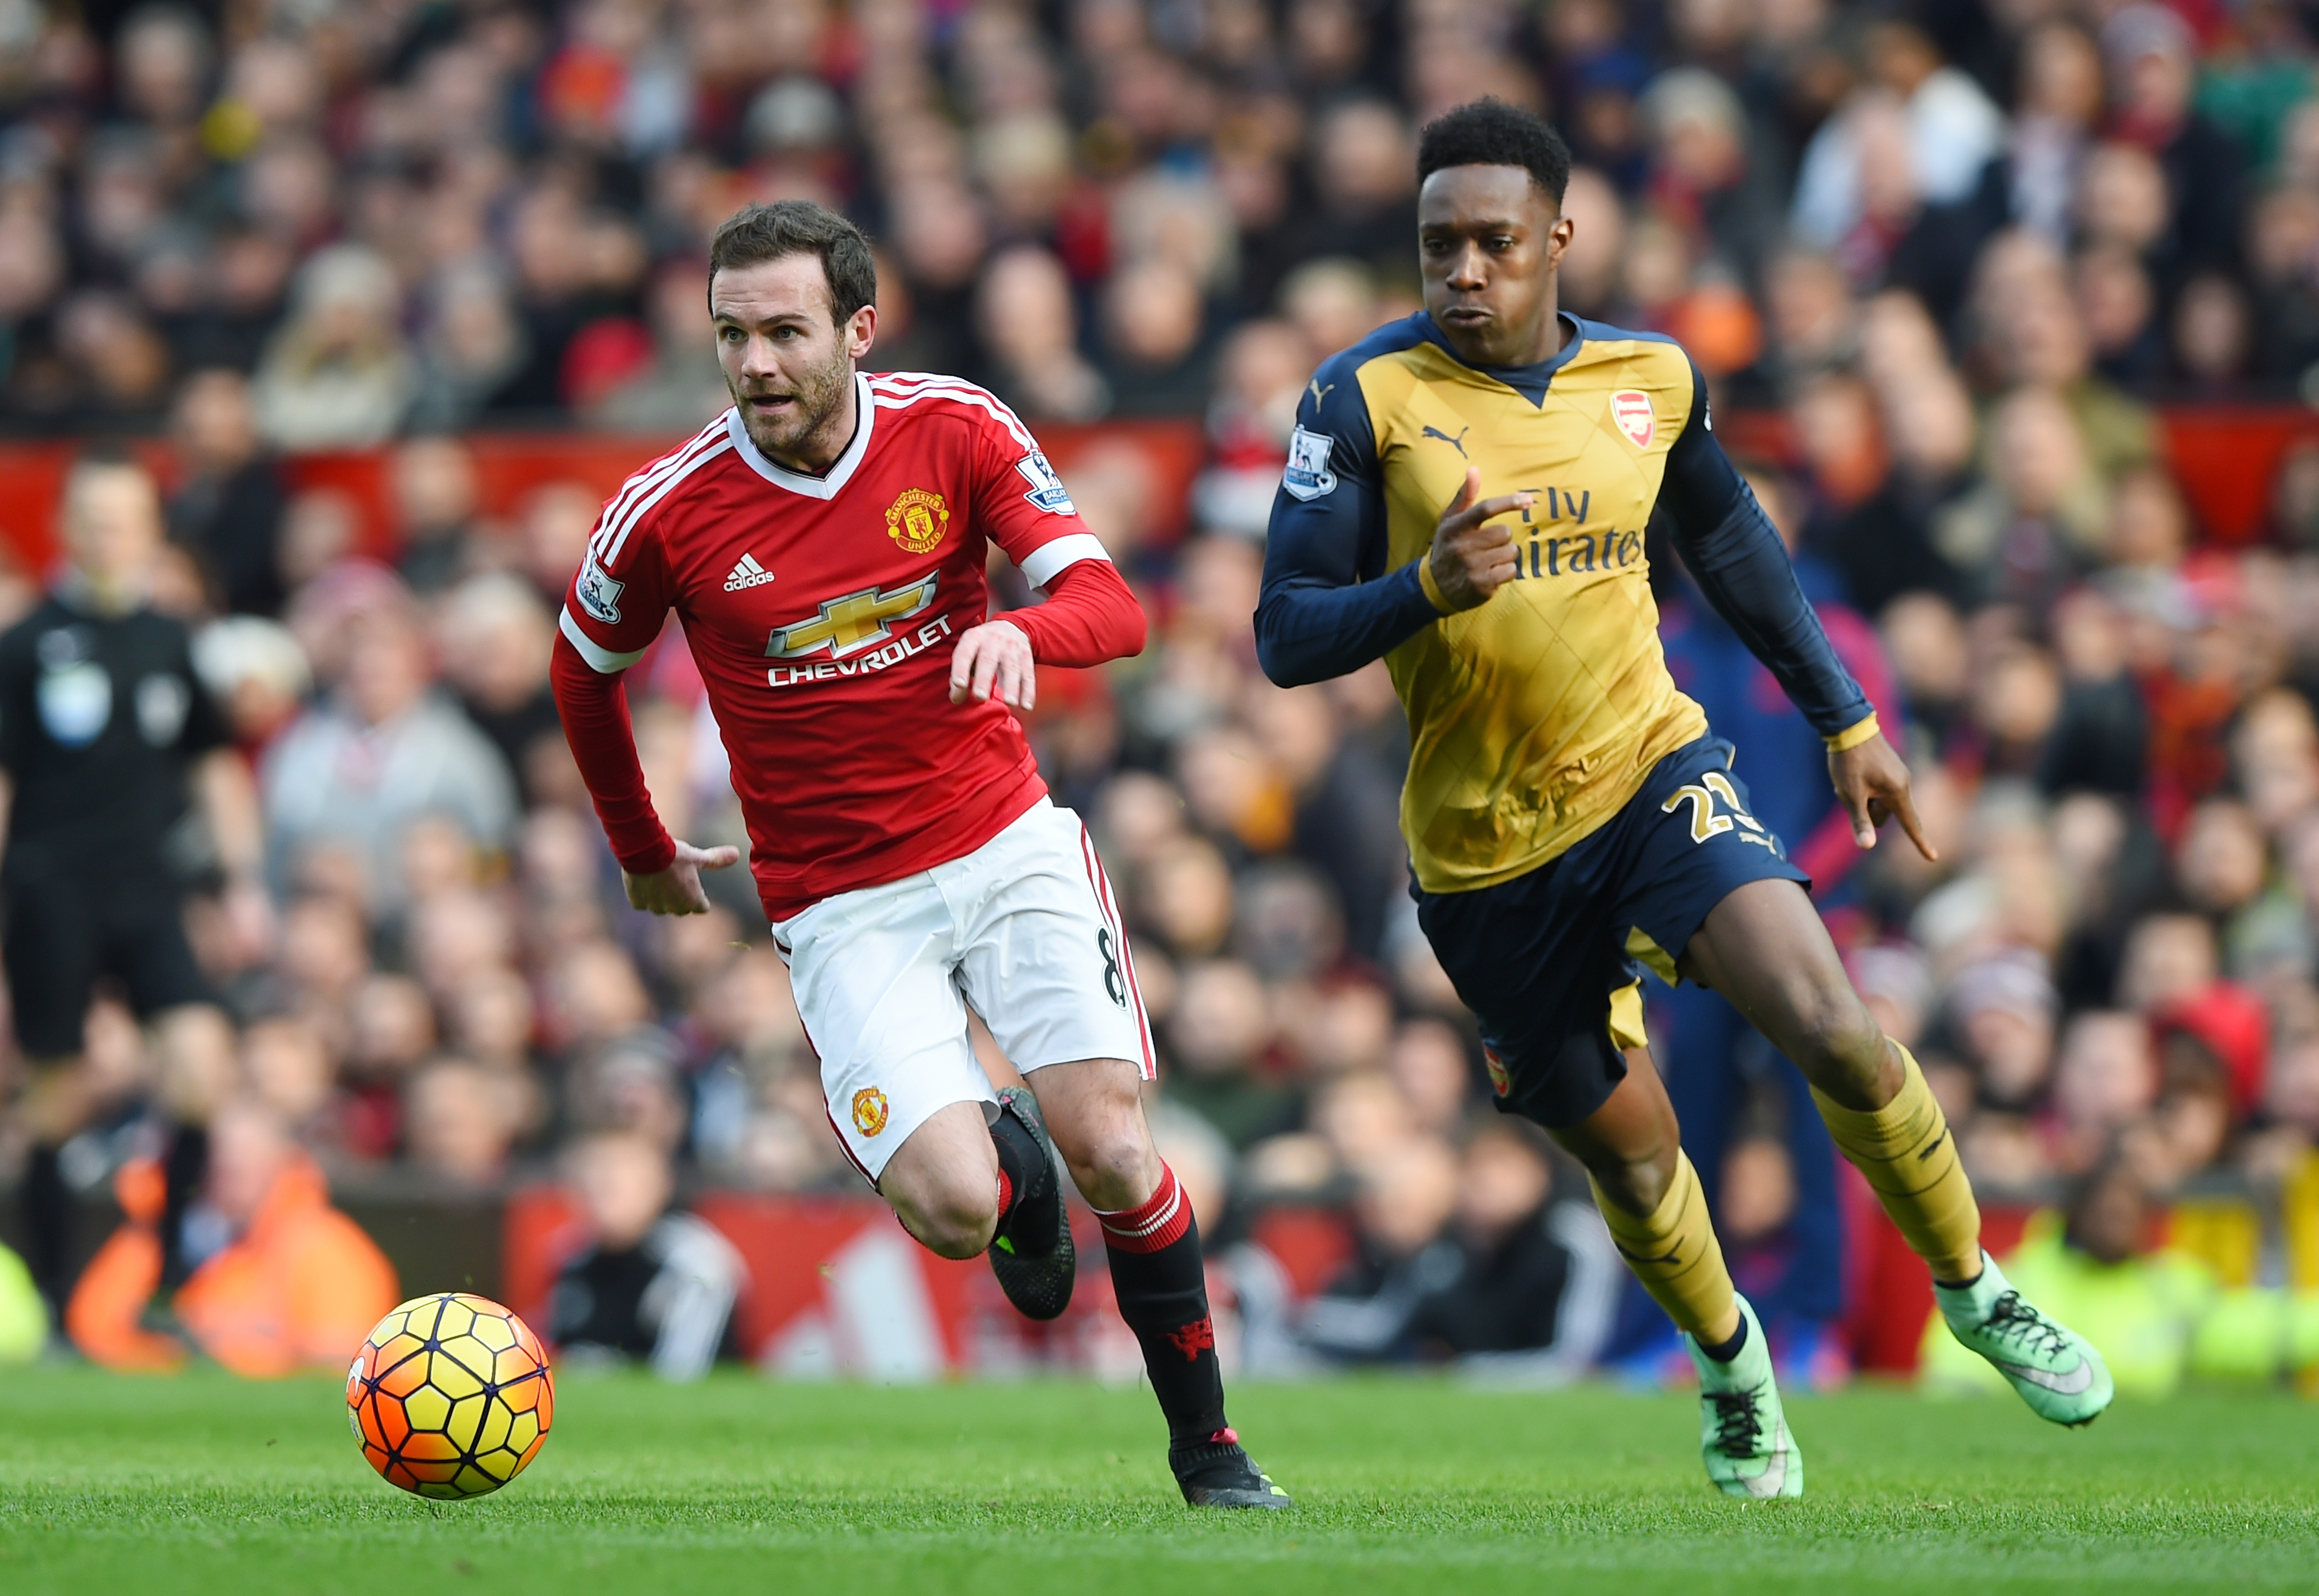 Arsenal vs Manchester United: The historic rivalry over the years